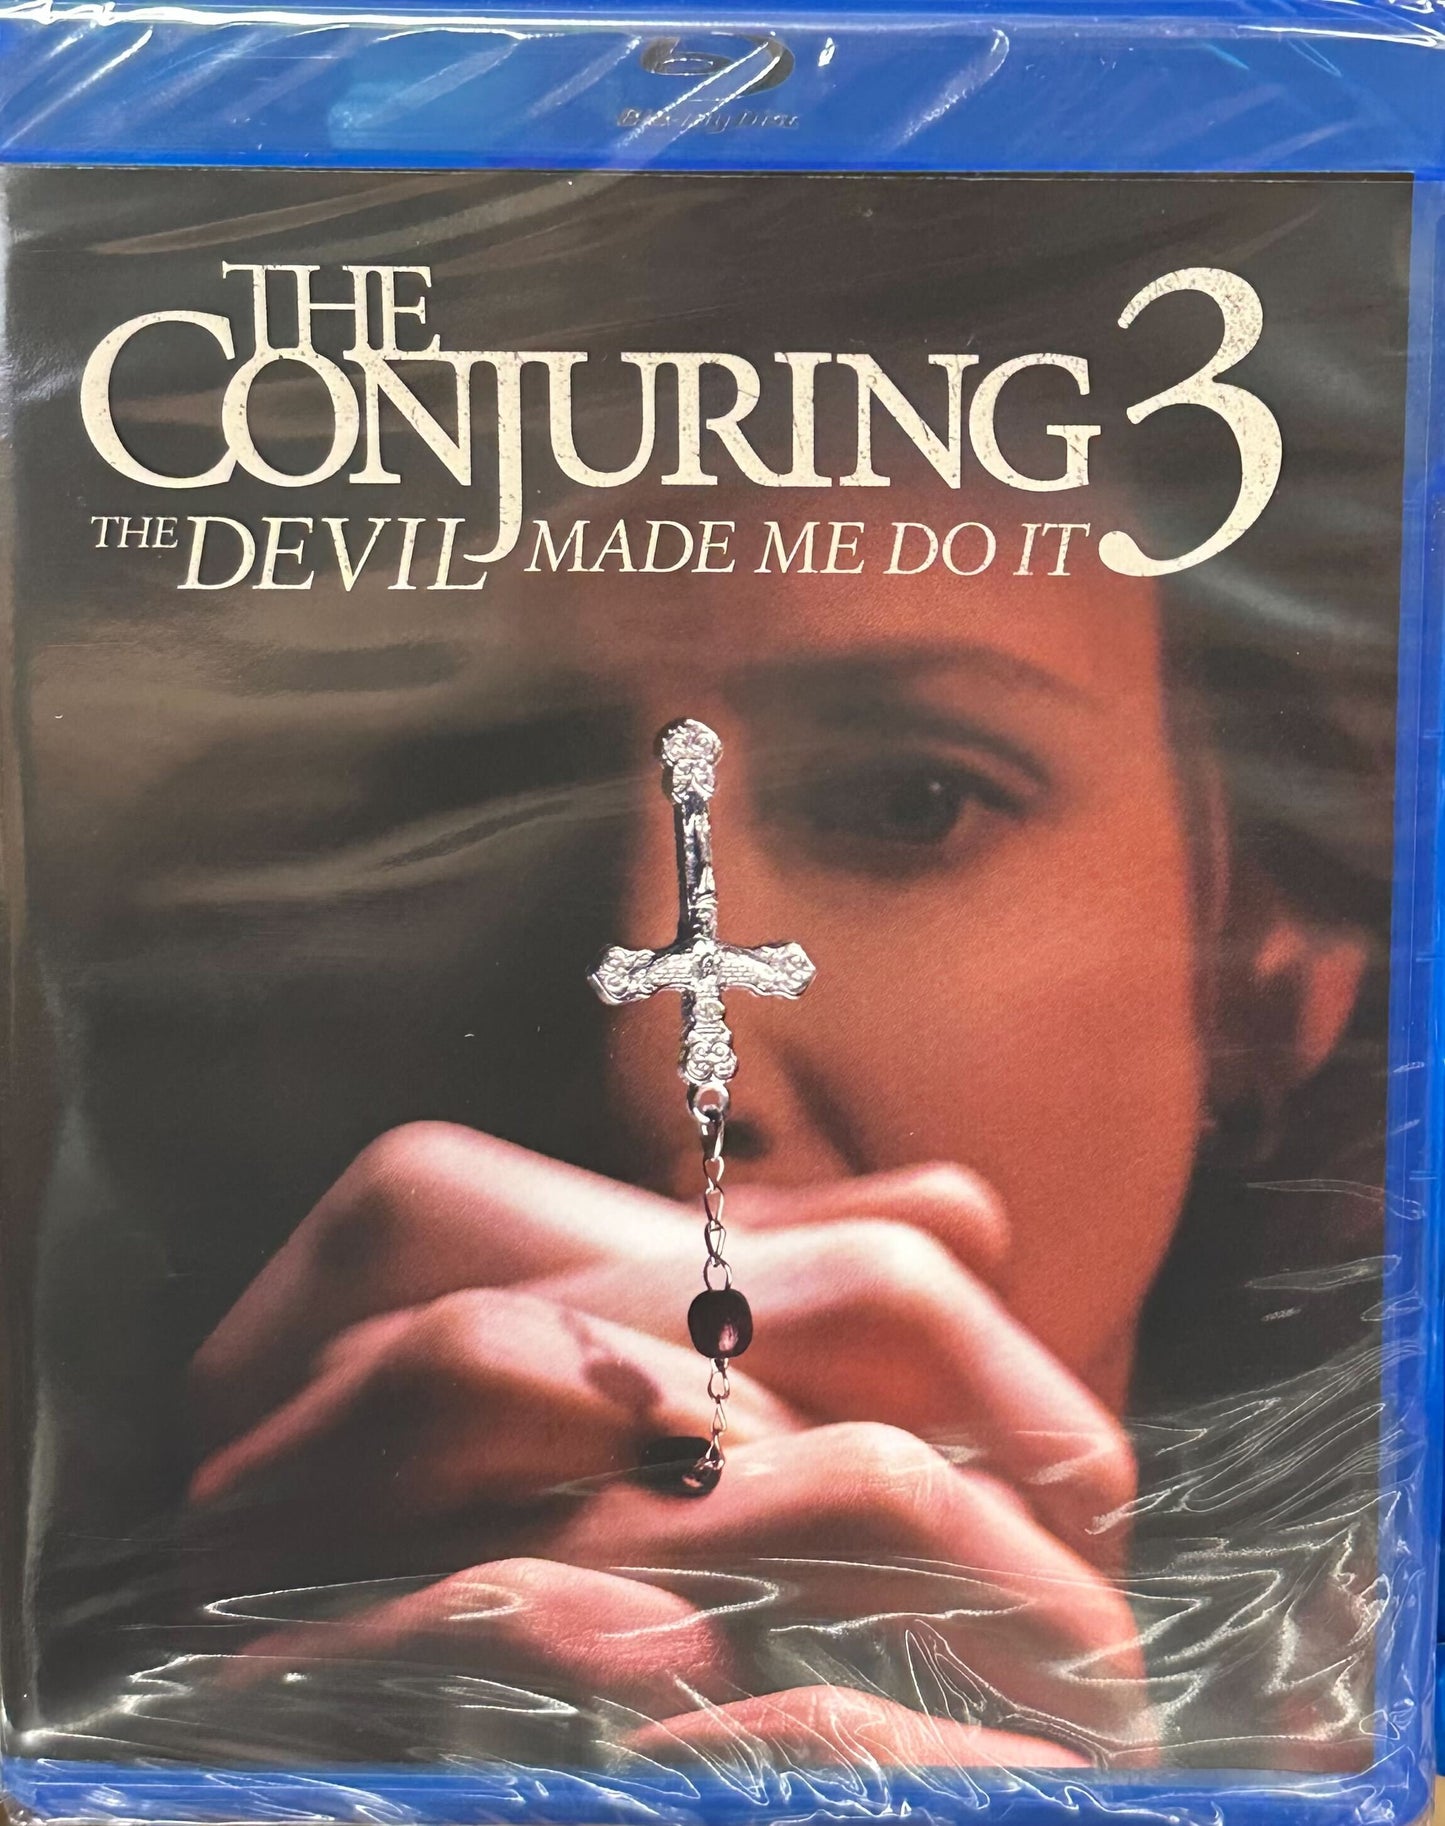 The Conjuring 3: The Devil Made Me Do It Blu-ray